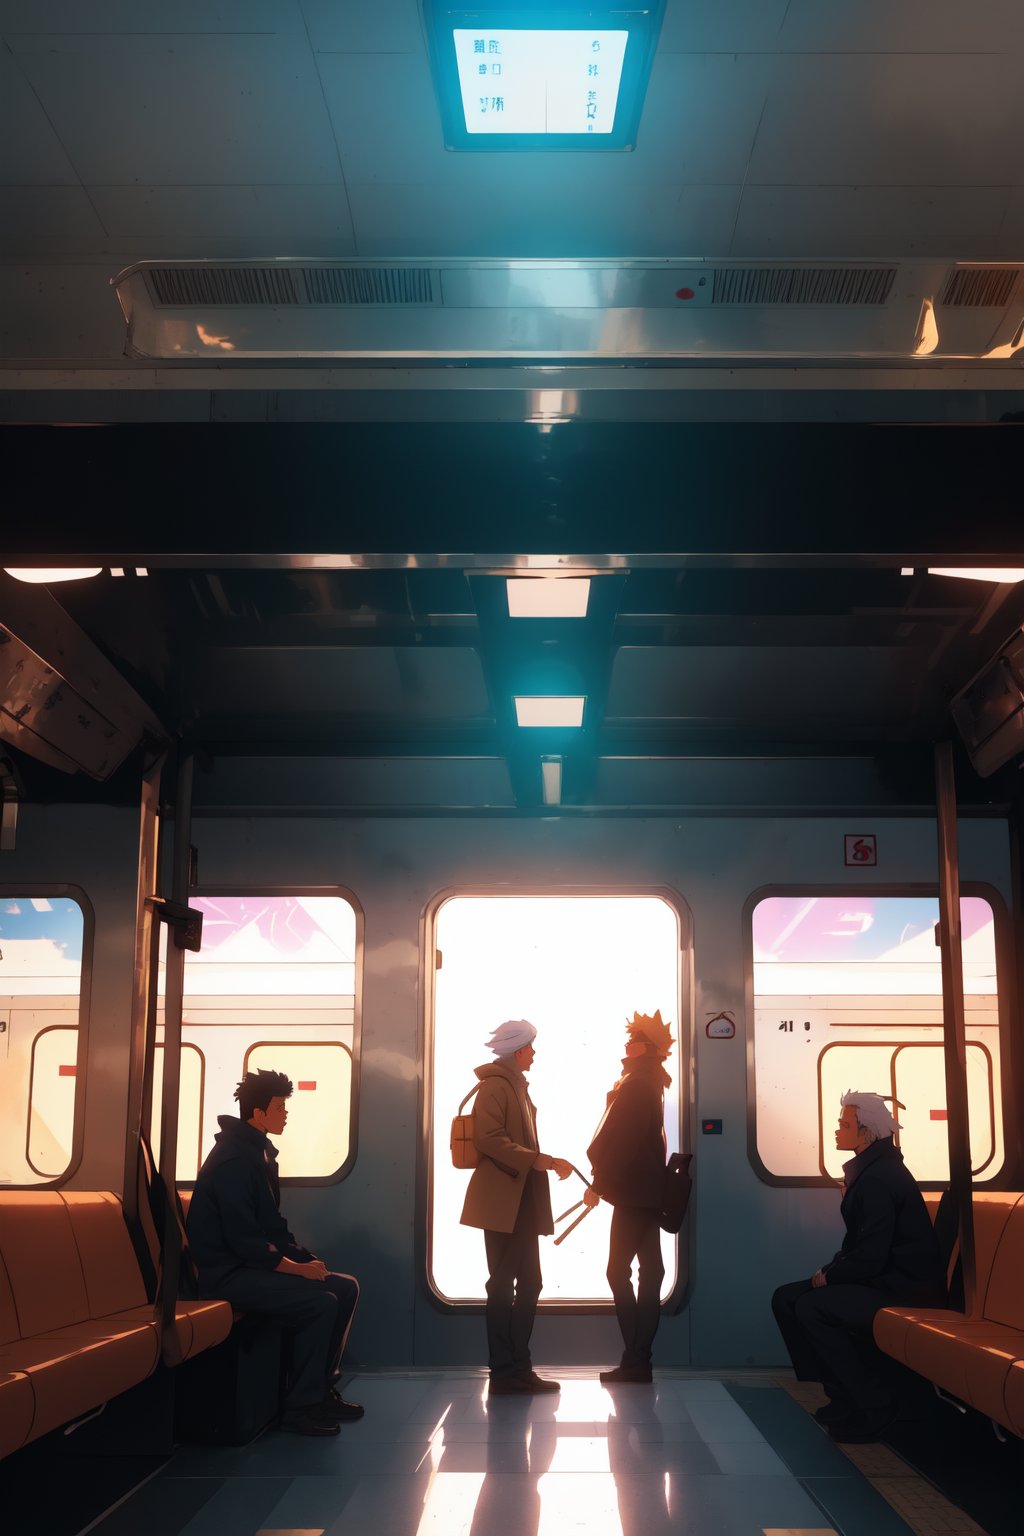 Crowded train station, busy hours, metropolitan city, 1boy in the metro station, light ray, directions, train station background, dynamic lighting, realistic, mass people, various professions, all genders, teens, adult, elders, anime style, manga style, colorfull,r1ge